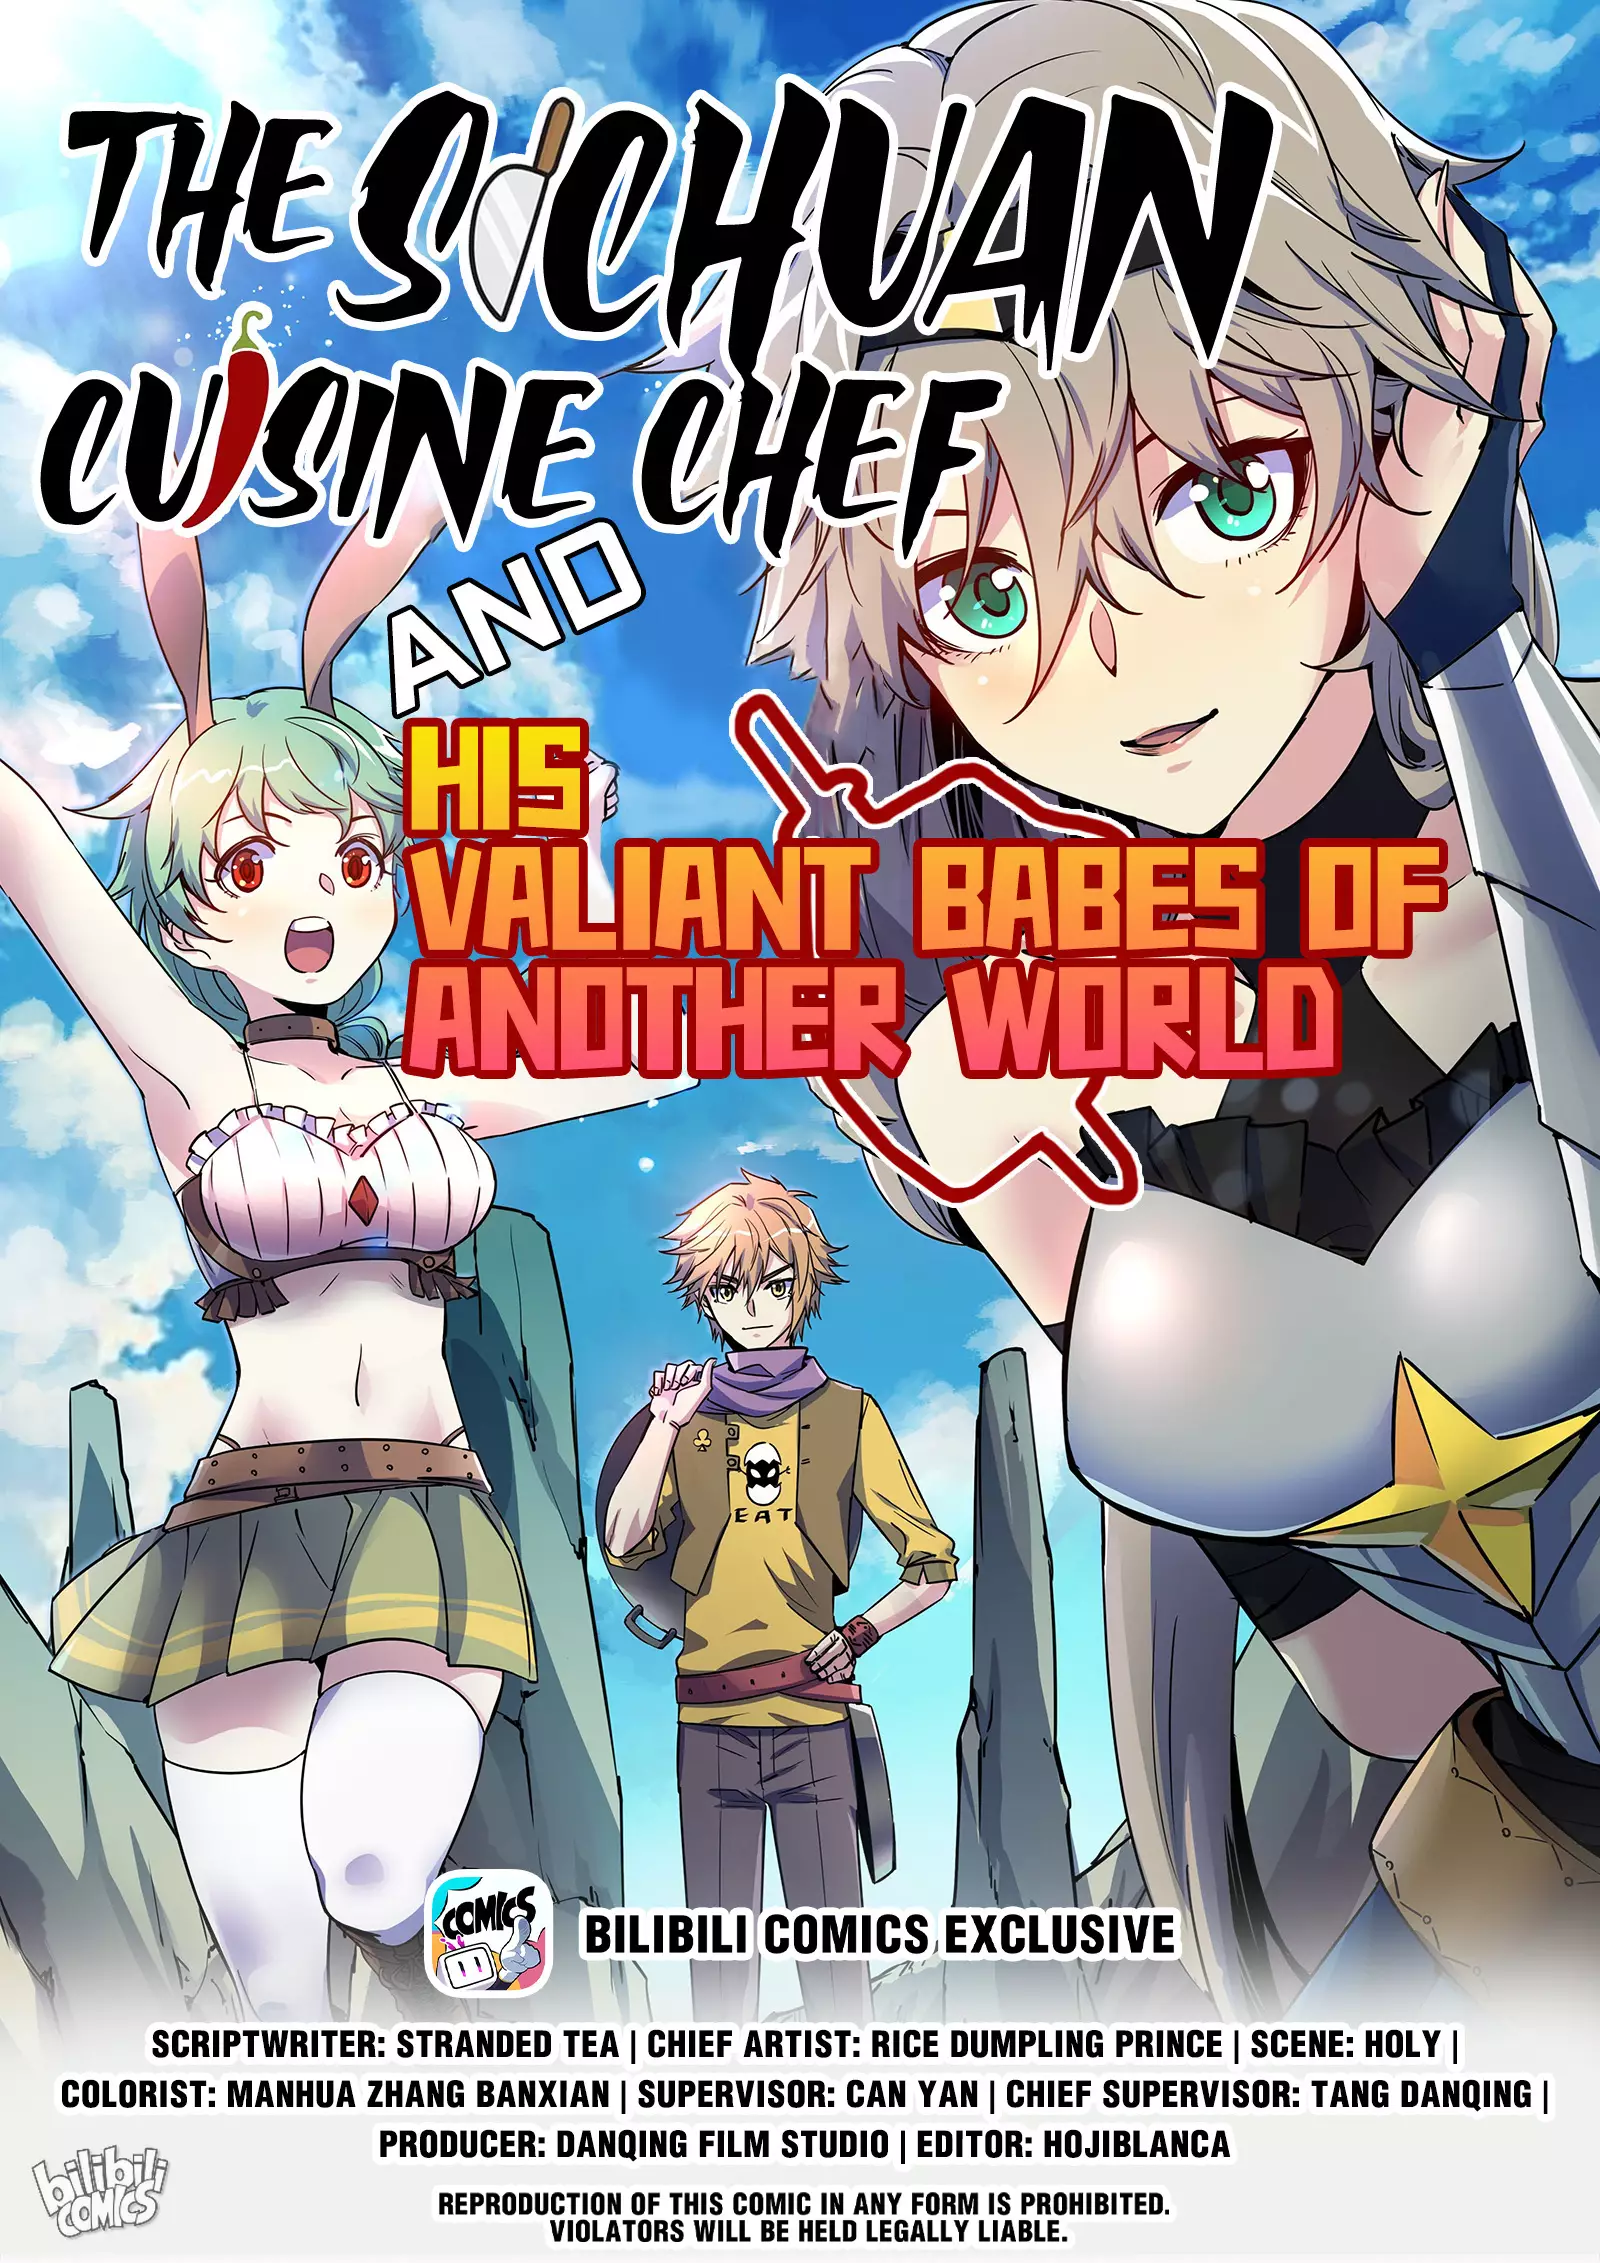 The Sichuan Cuisine Chef And His Valiant Babes Of Another World - 34 page 1-045c140f